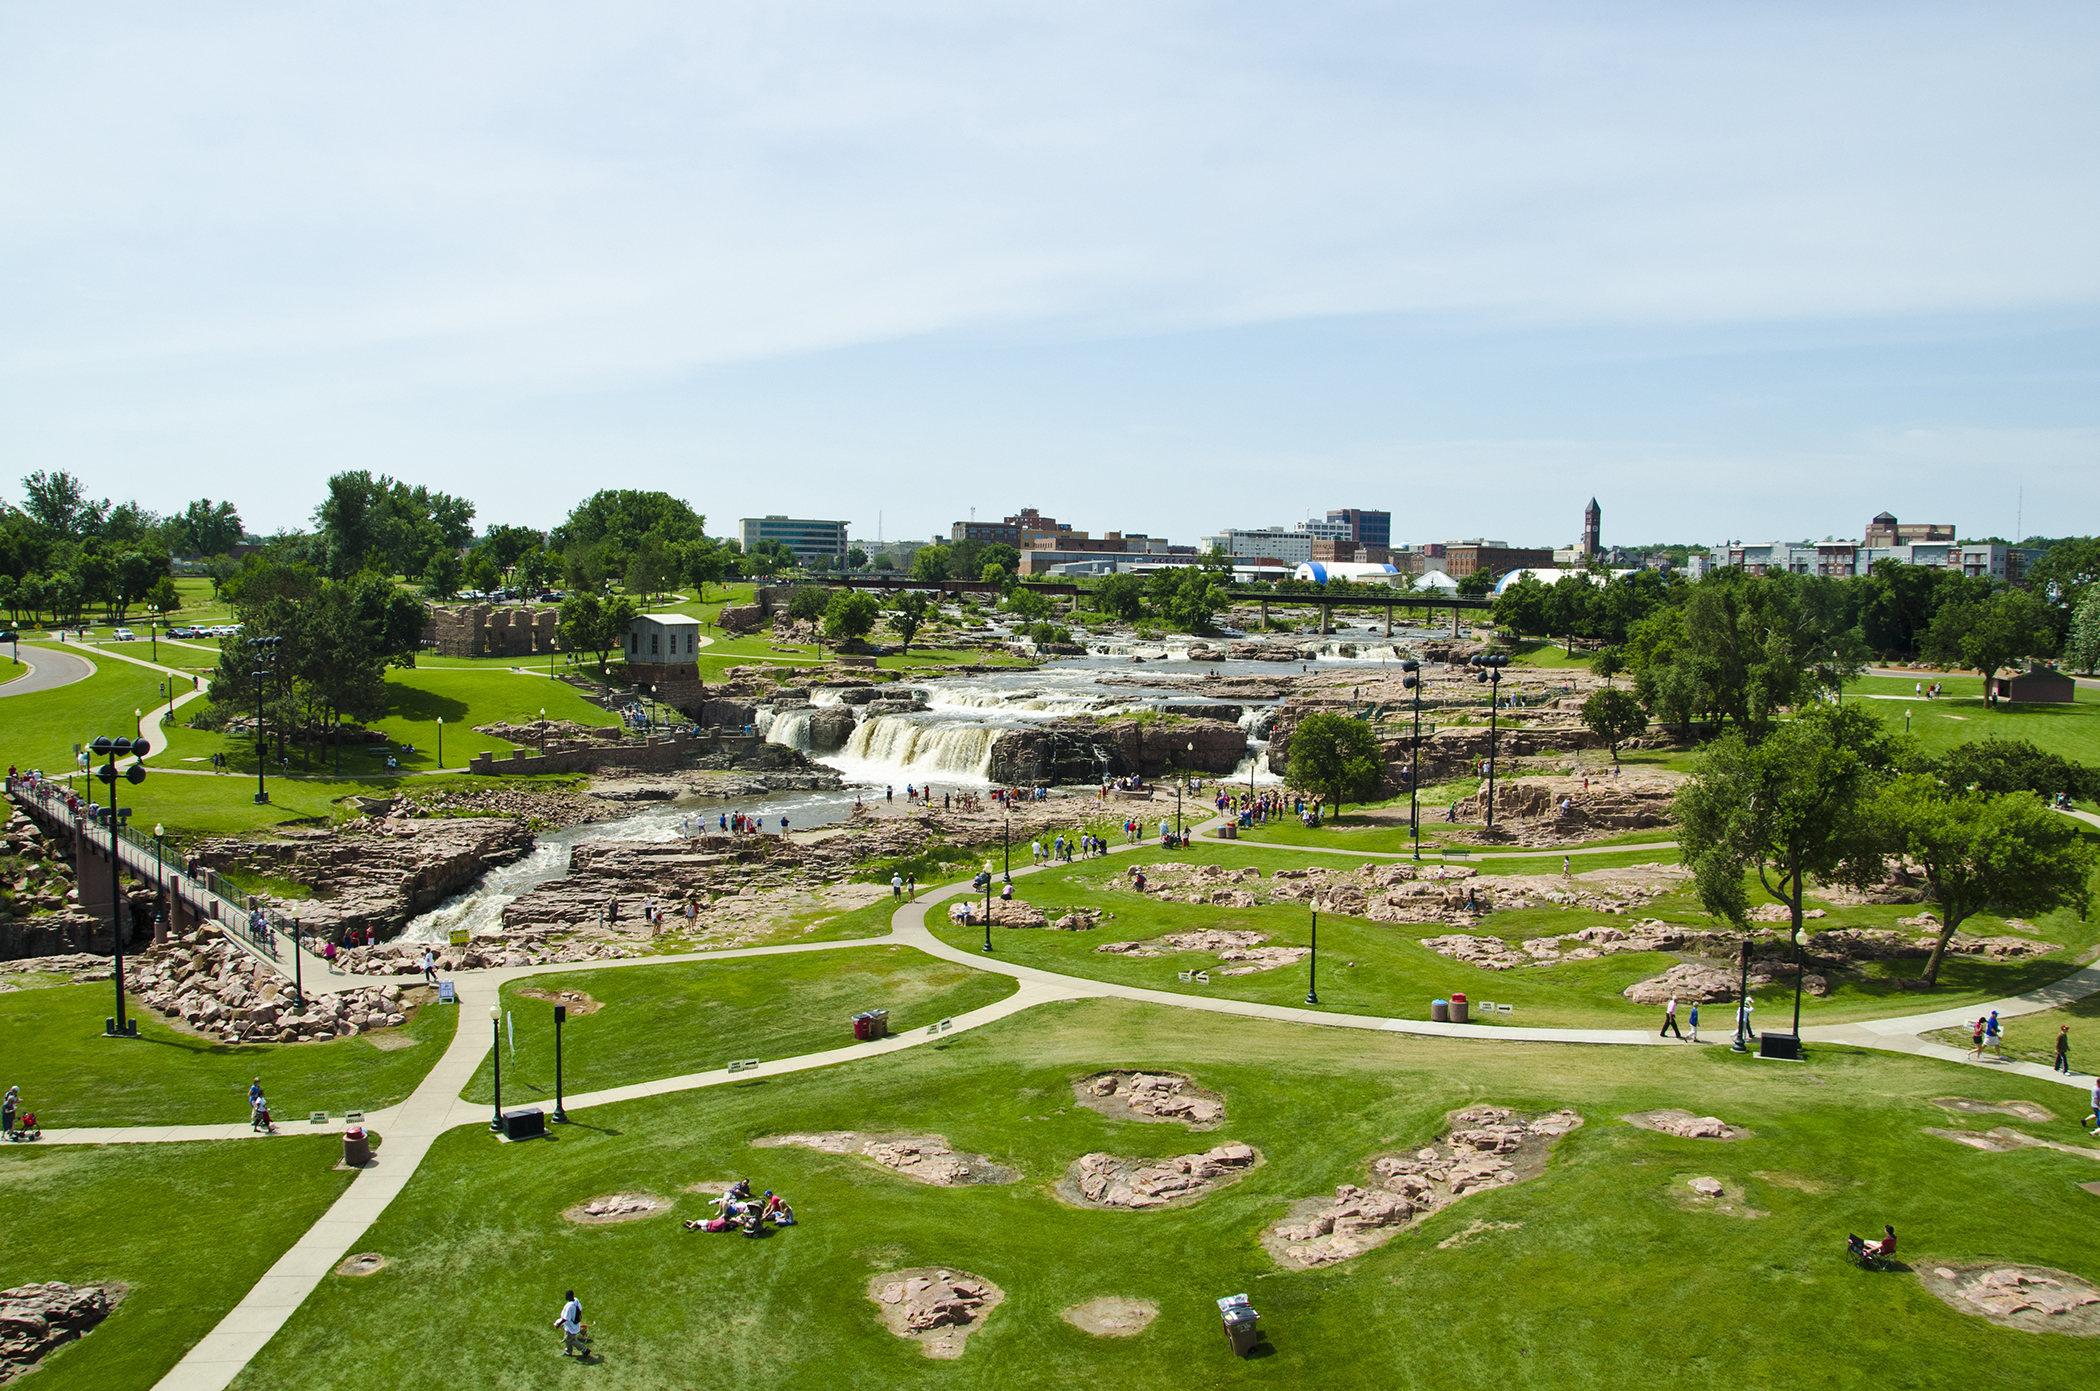 Sioux Falls, South Dakota. The Falls get top billing, but events like the monthly “First Friday,” where businesses and restaurants stay open late and organize live music, also draw bring crowds to this city on the Big Sioux river.